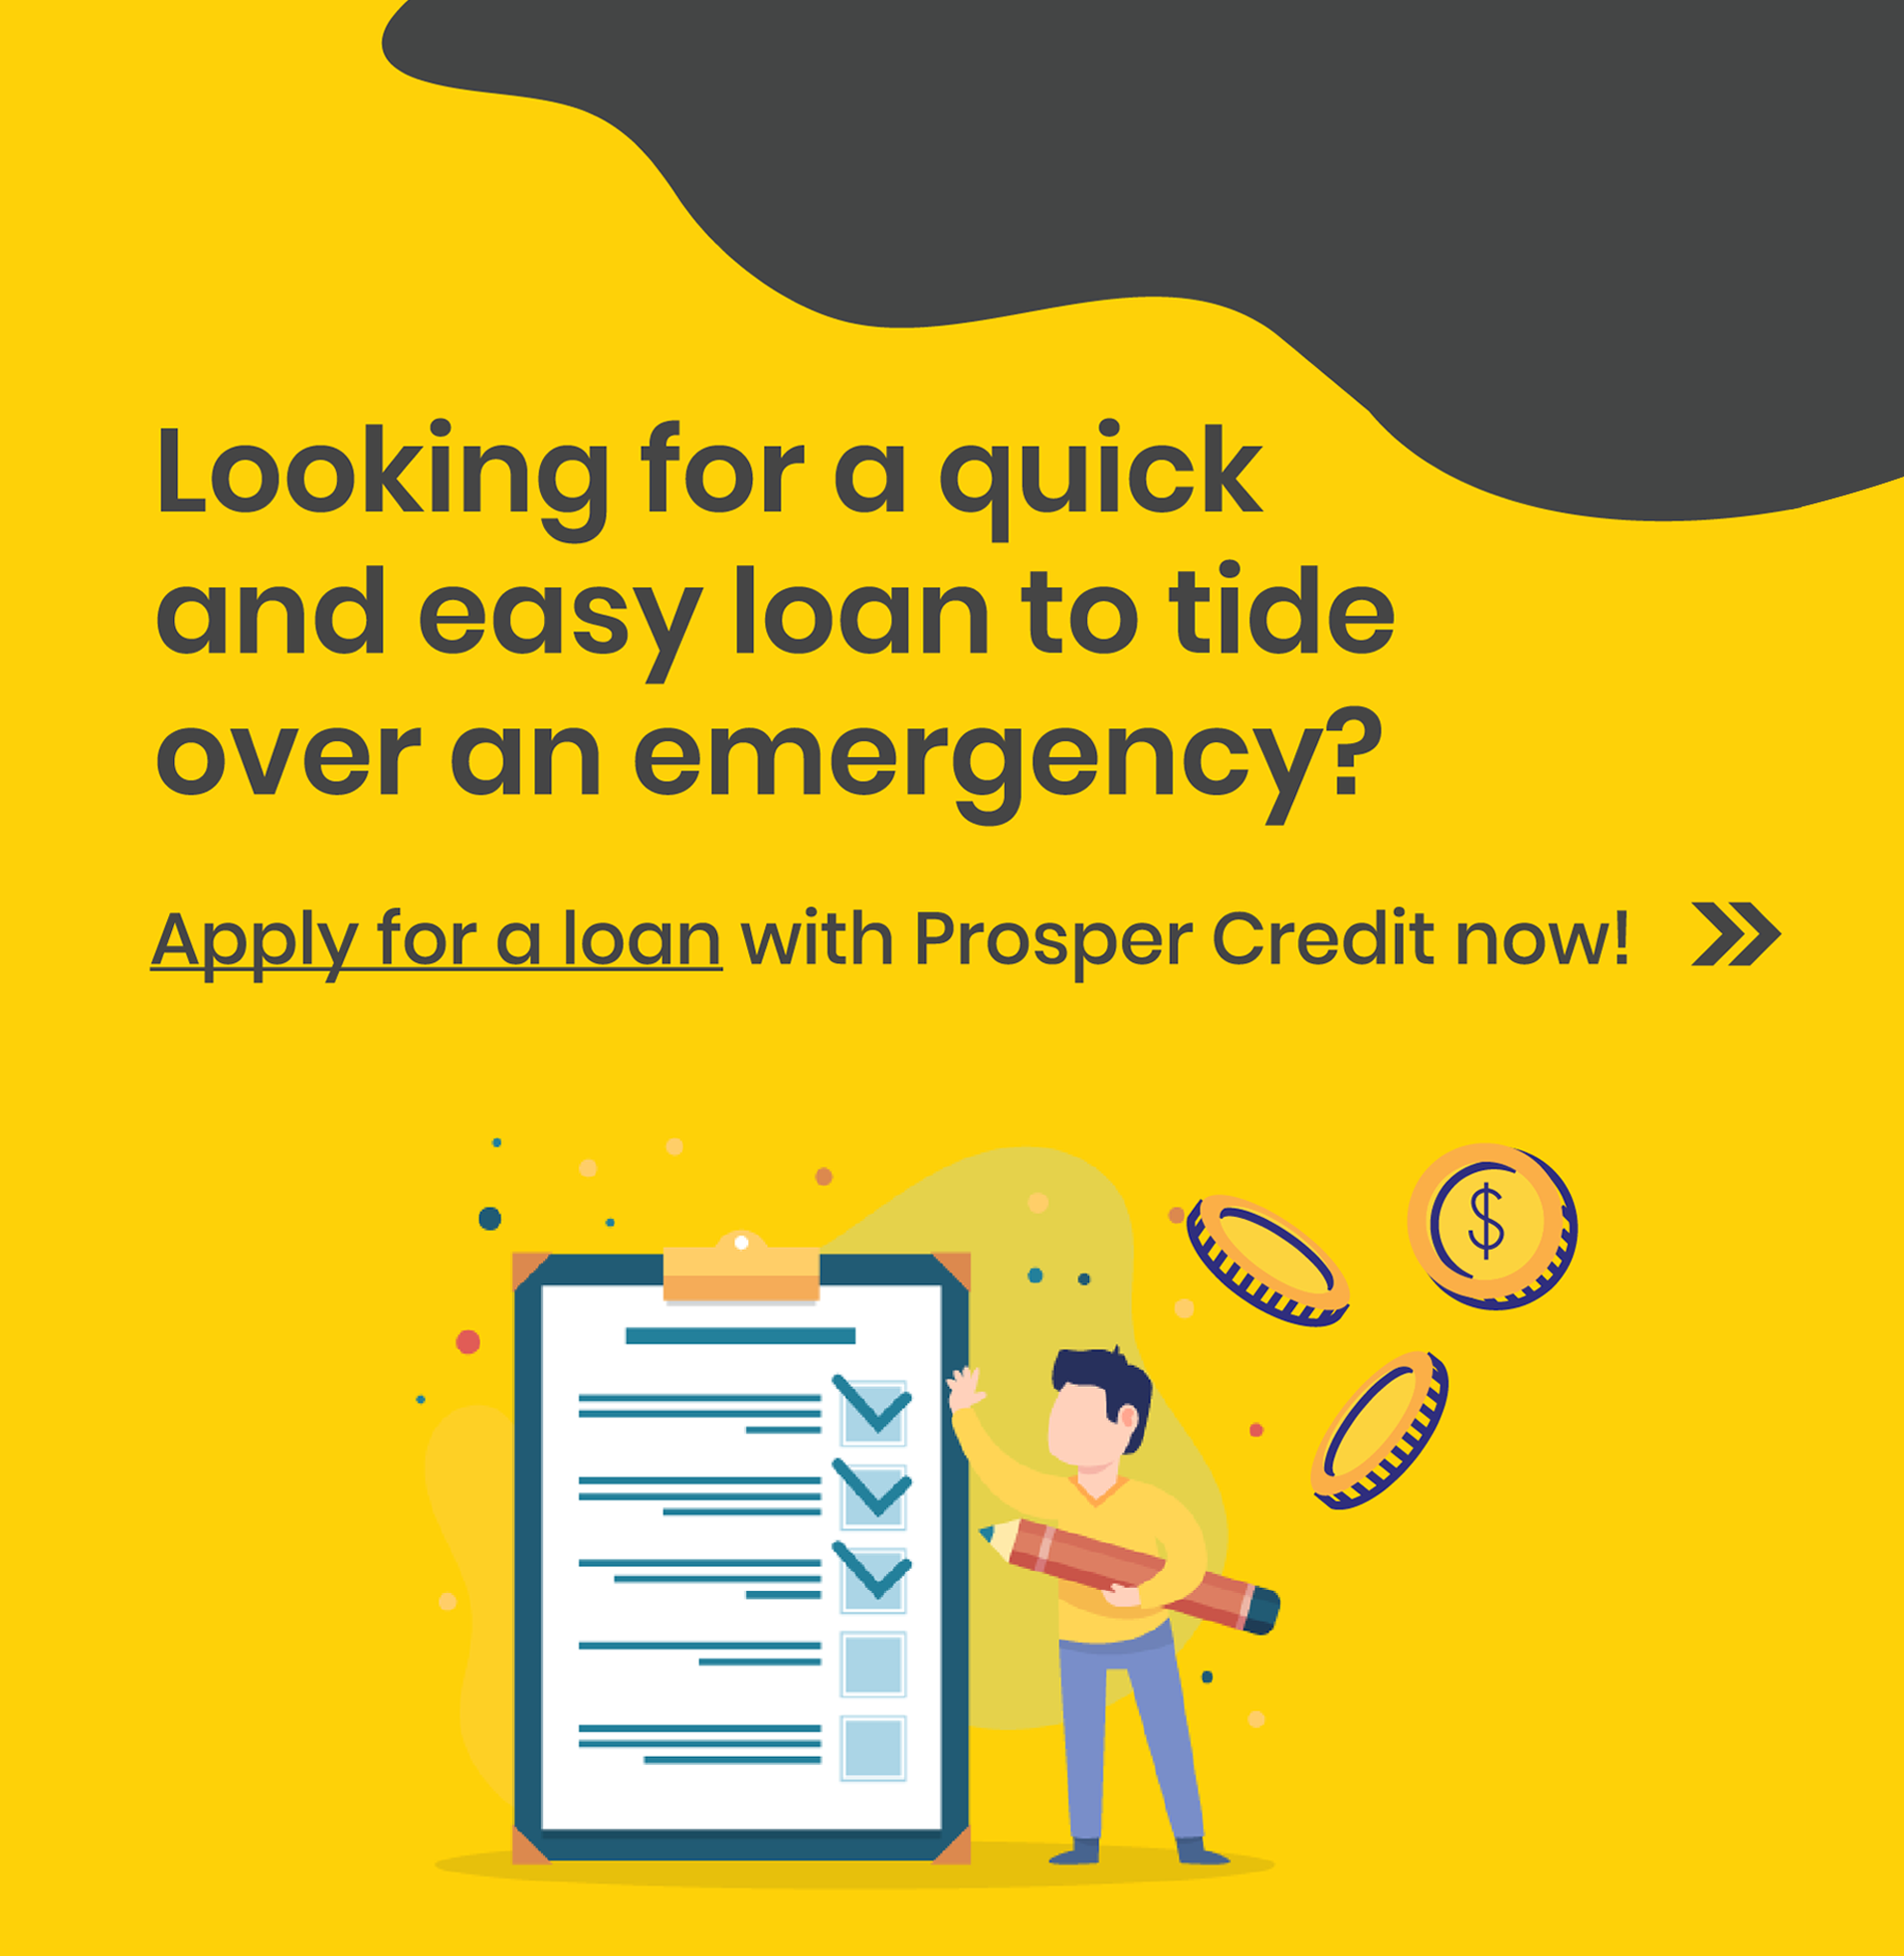 Looking for a quick and easy loan to tide over an emergency